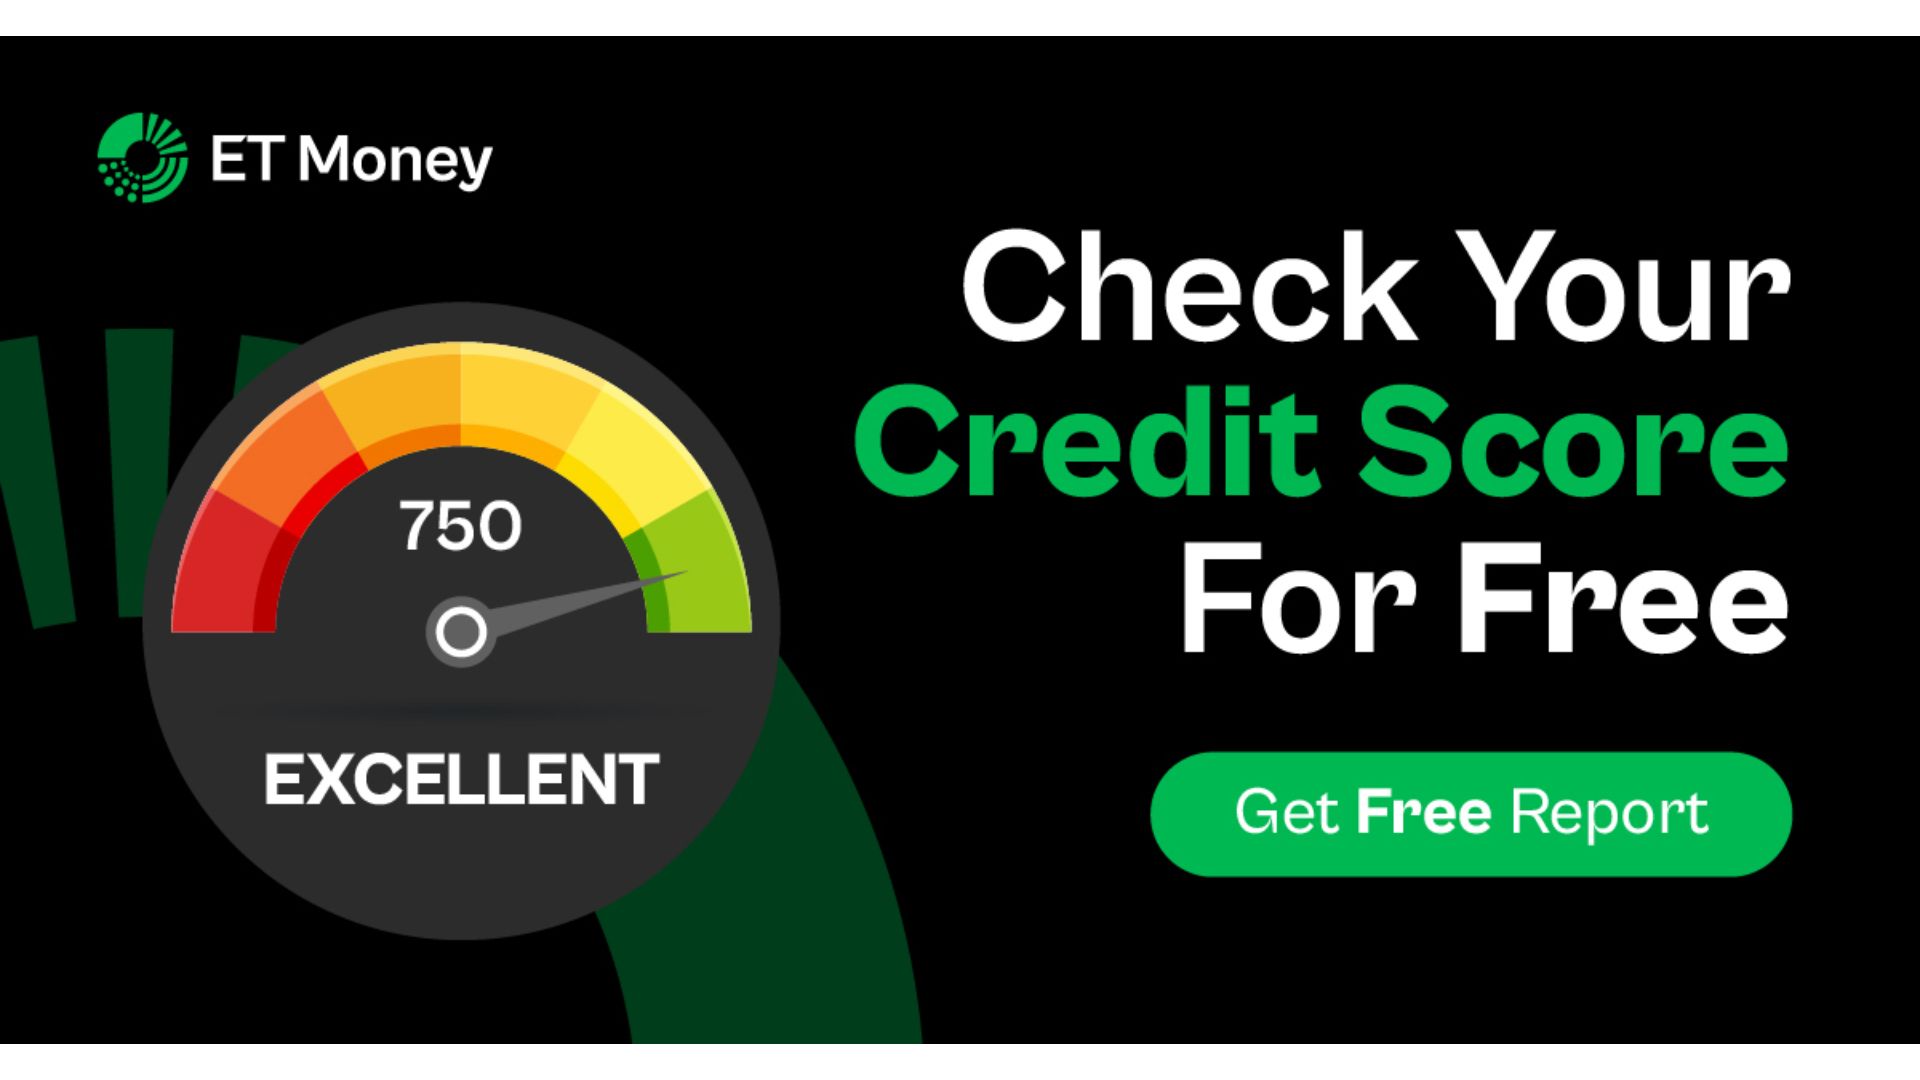 How to Check Your Credit Score For Free